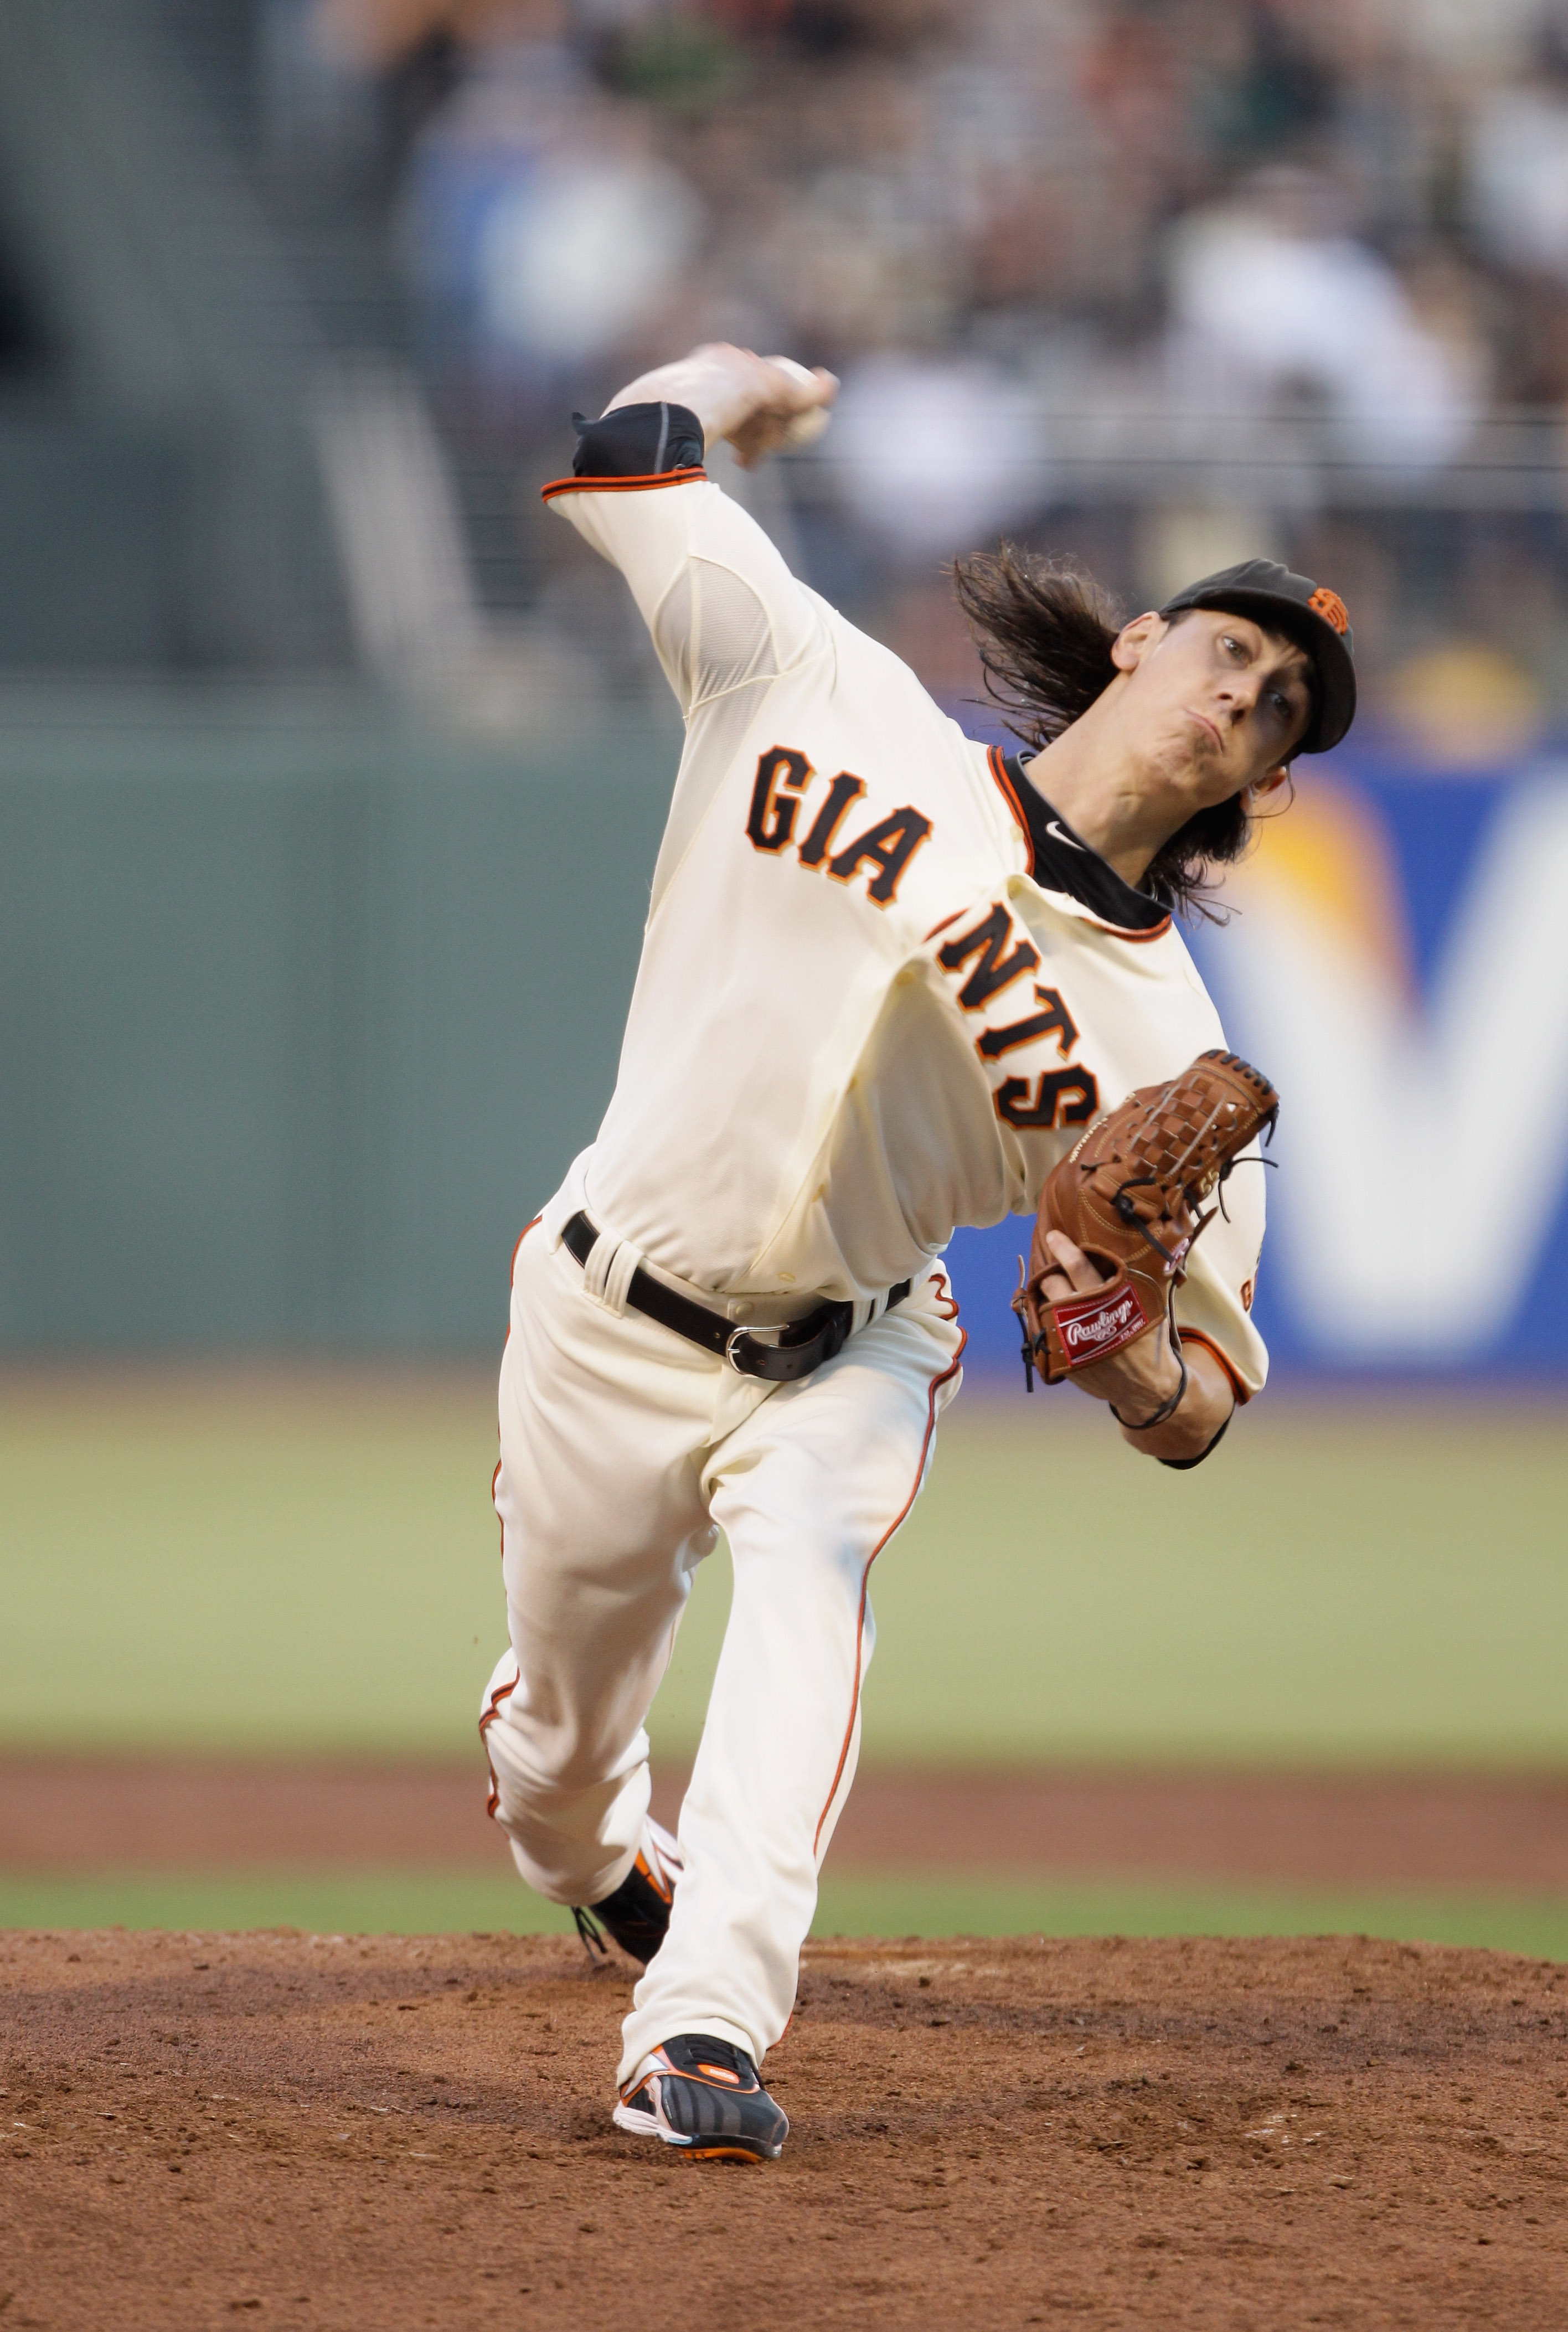 Moore to wear Lincecum's No. 55 for Giants